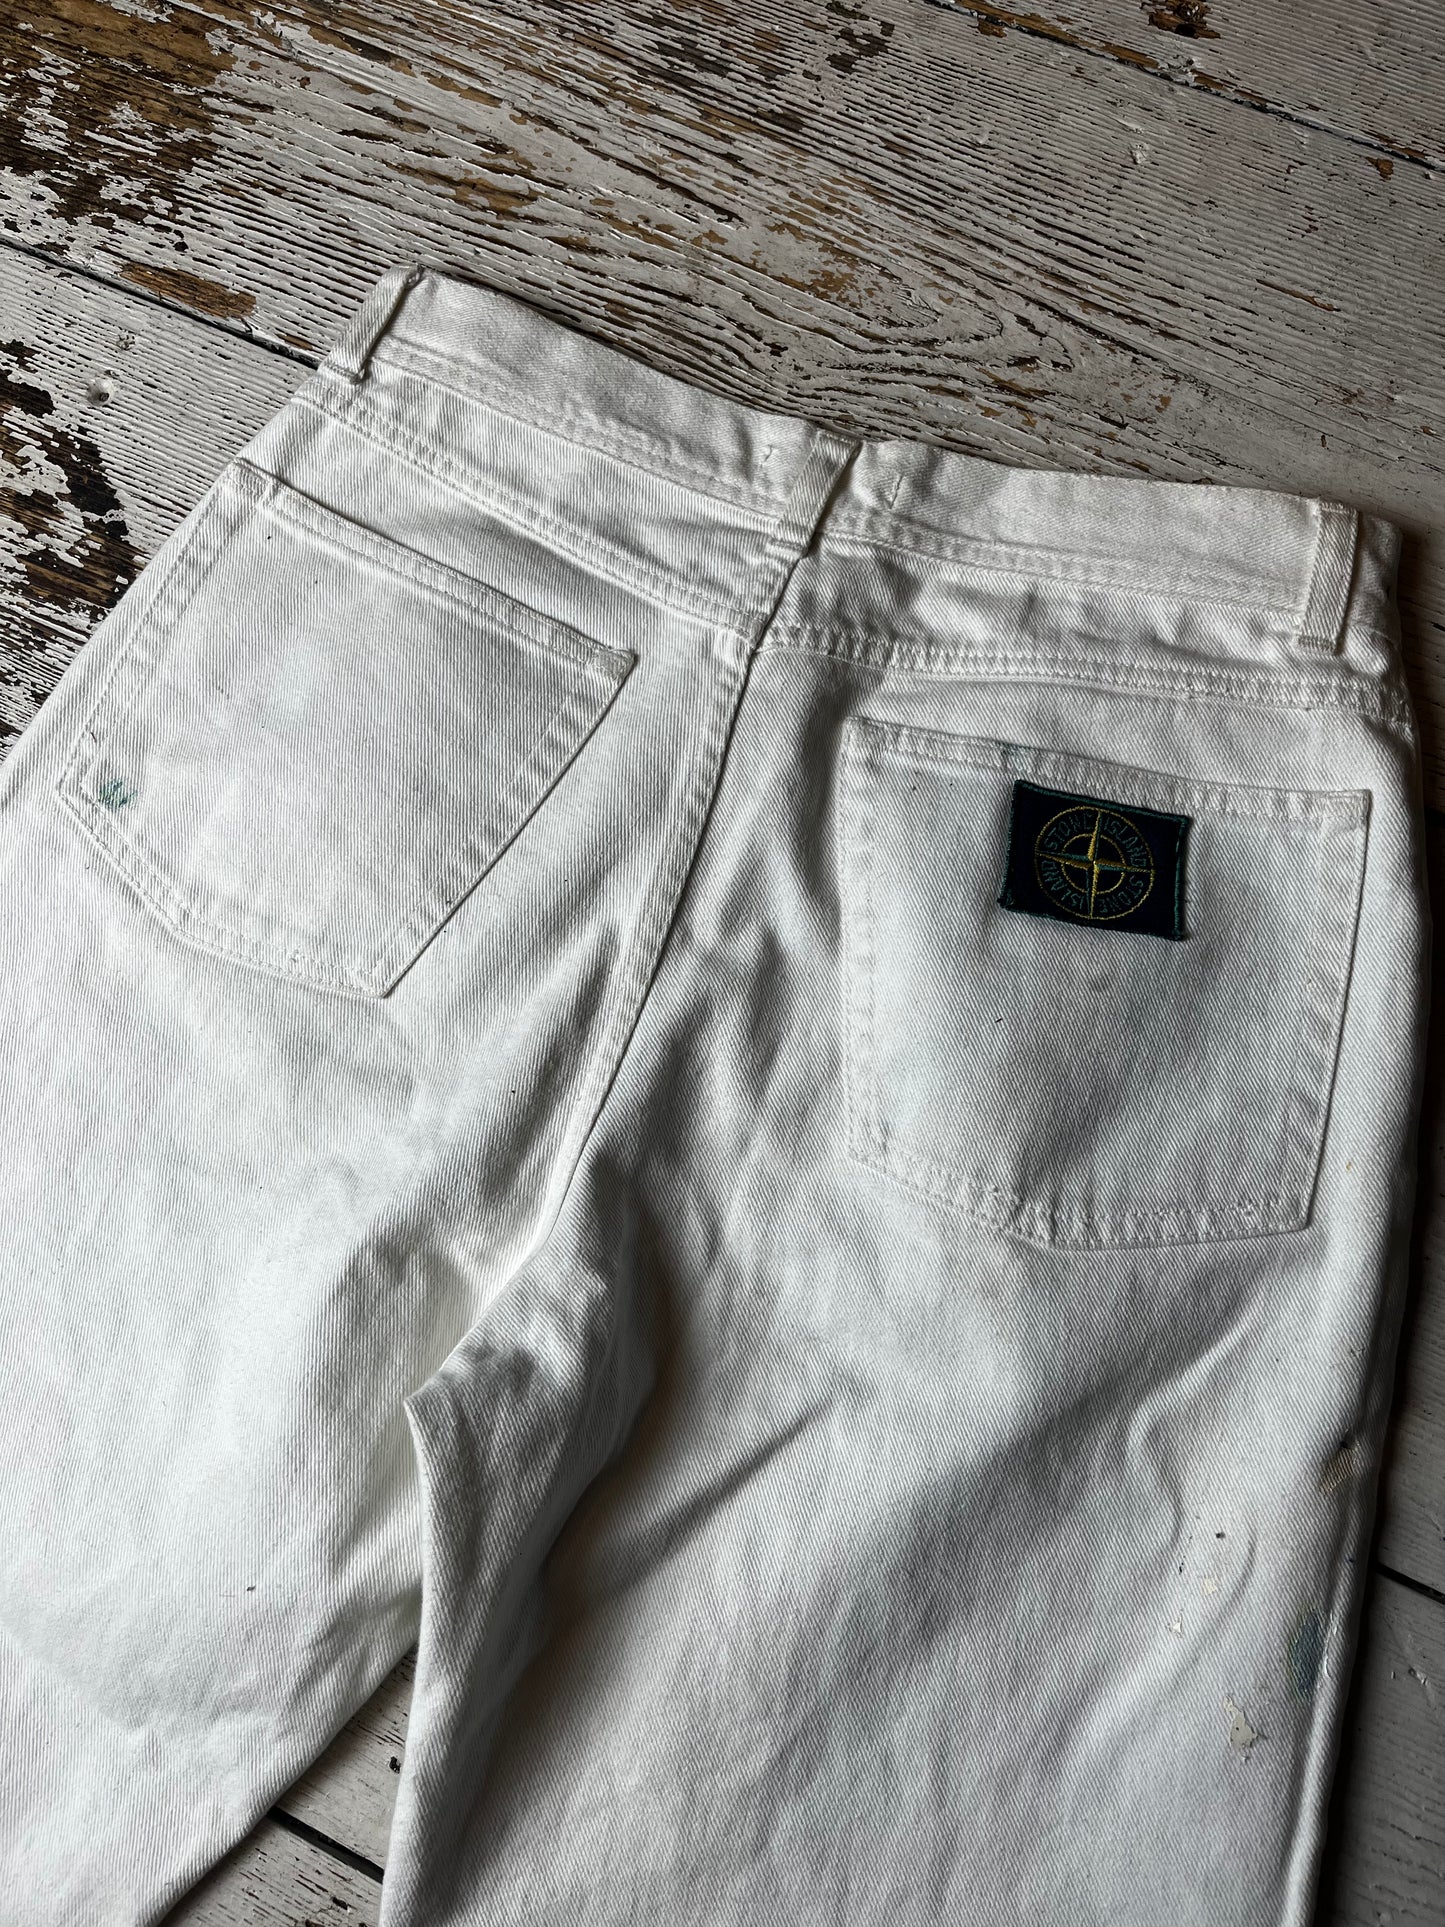 Stone Island “Lemons and Leaves” jeans by Anna Floto